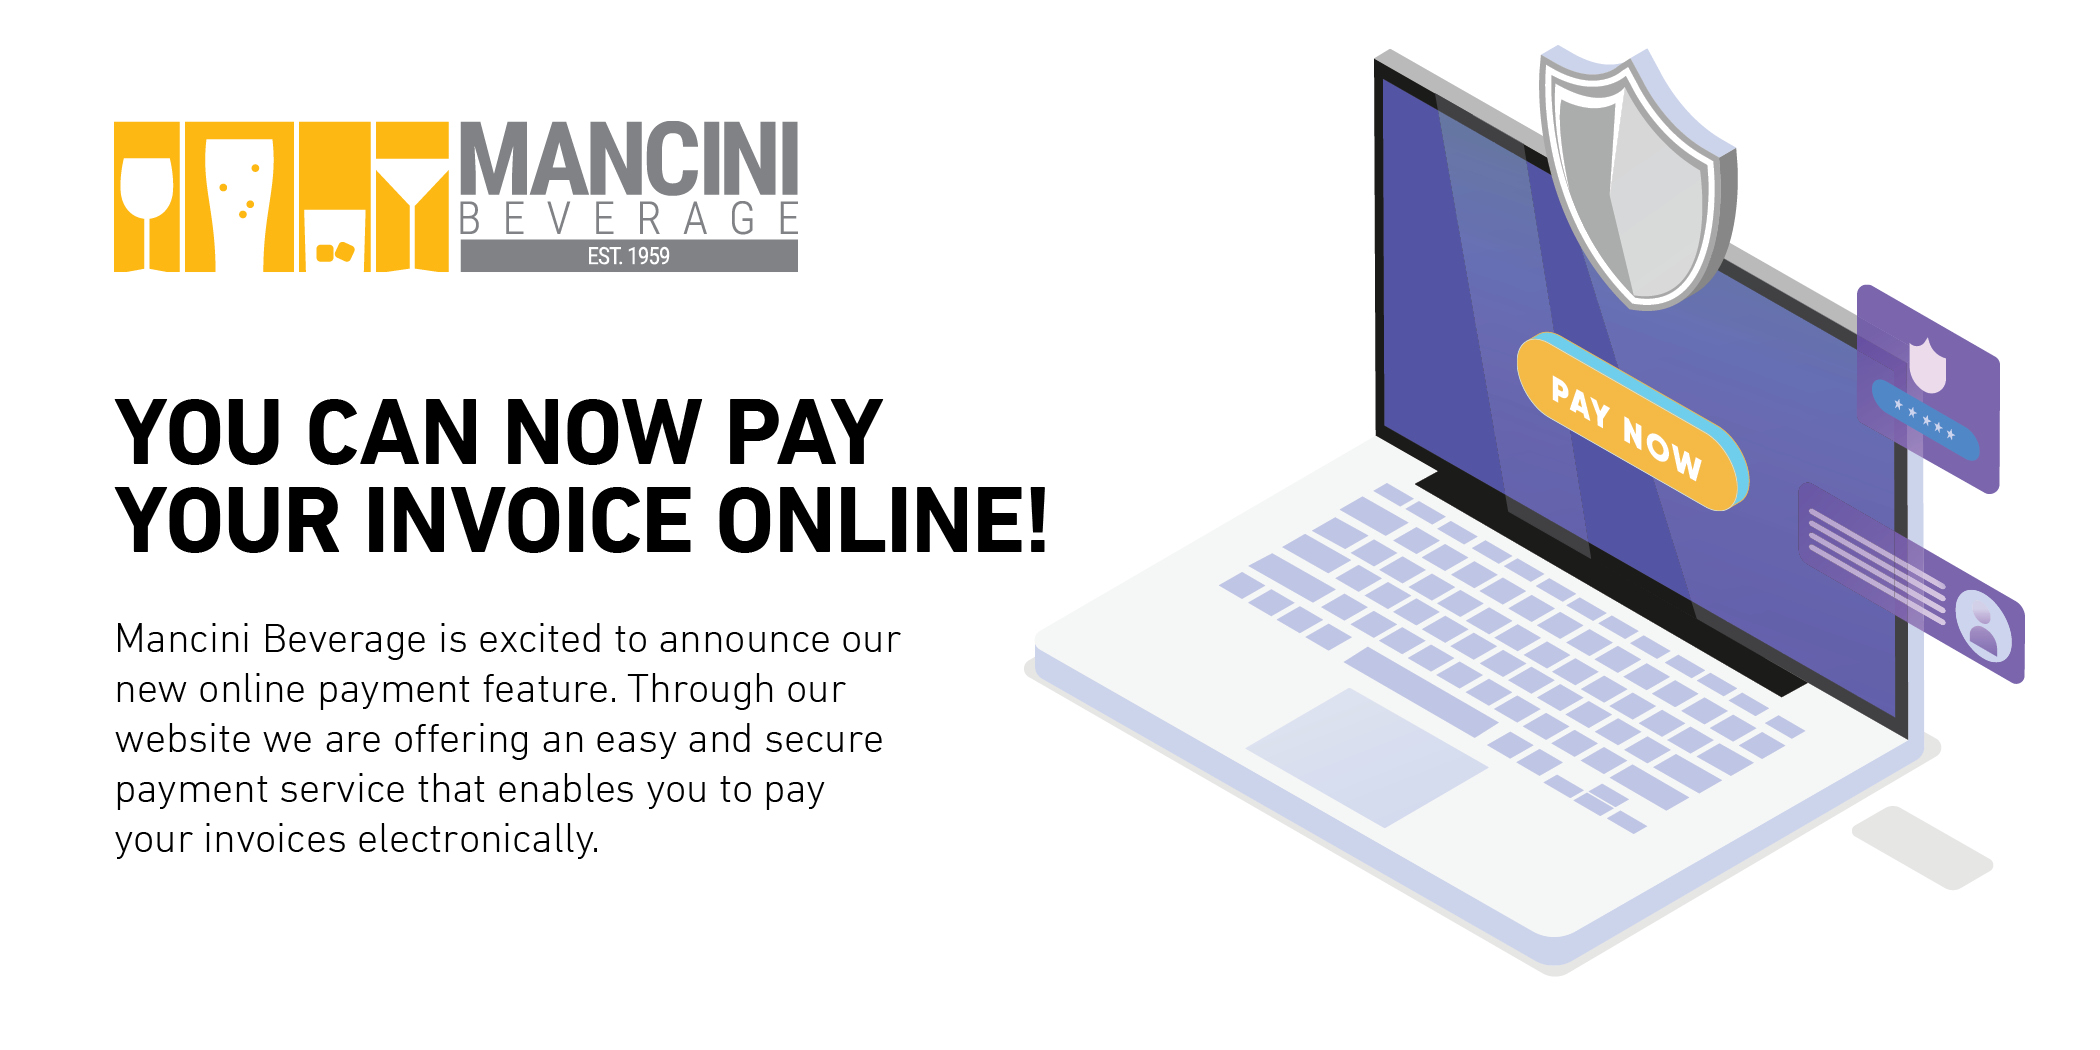 Mancini Online Payment Graphic for Website